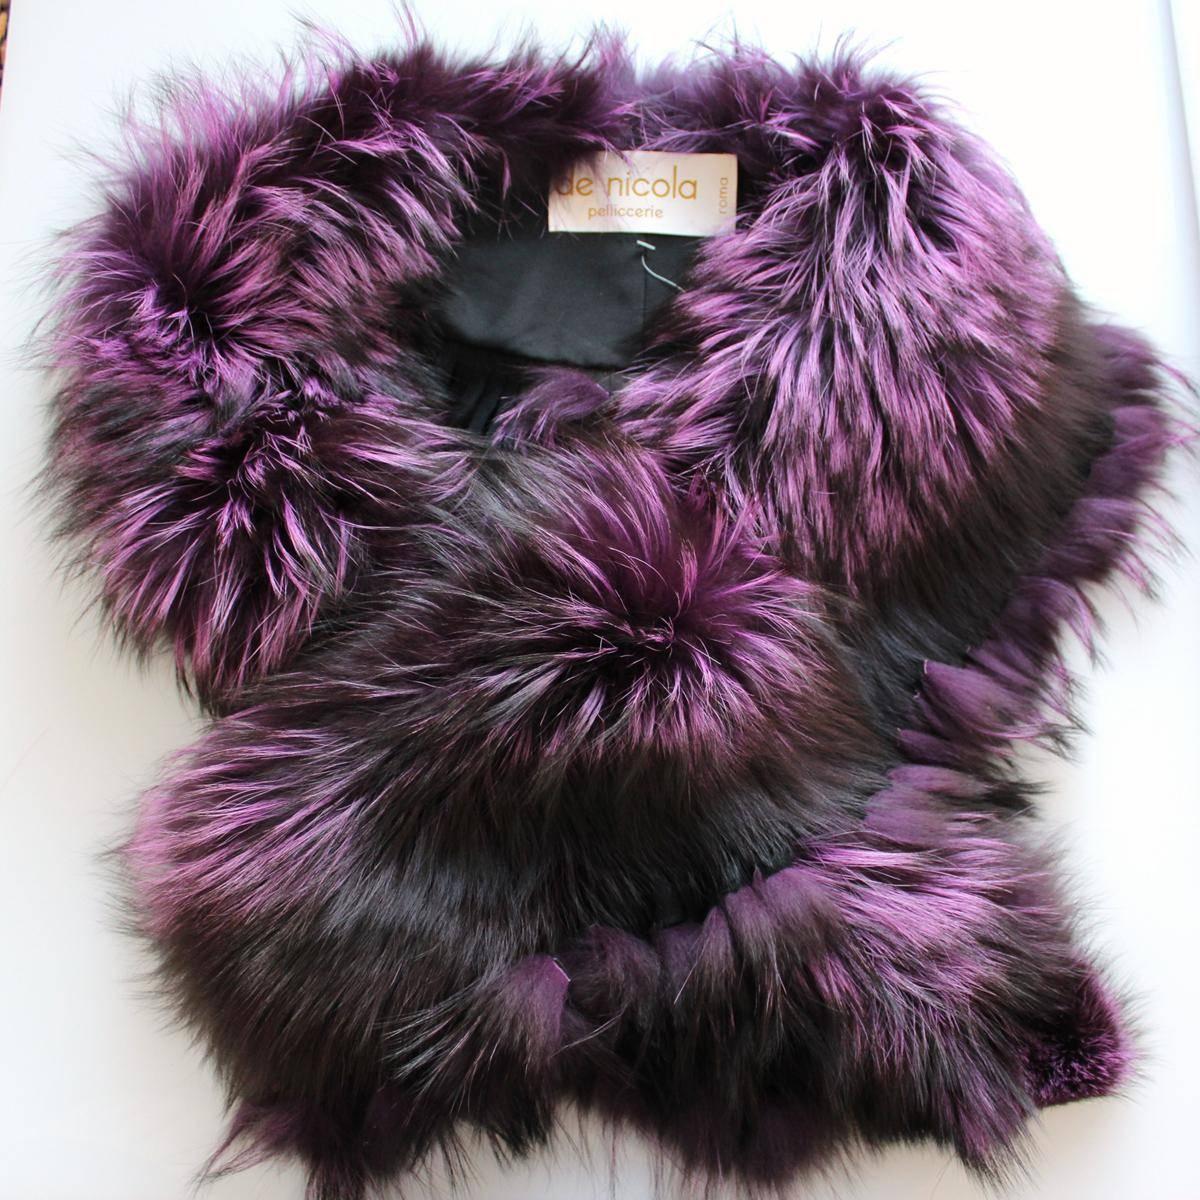 Magnificent fur collar by De Nicola Pelliccerie Roma
Fox fur
Purple color with shades
With pigtails
Total length cm 165 (64.9 inches)
Worldwide express shipping included in the price !